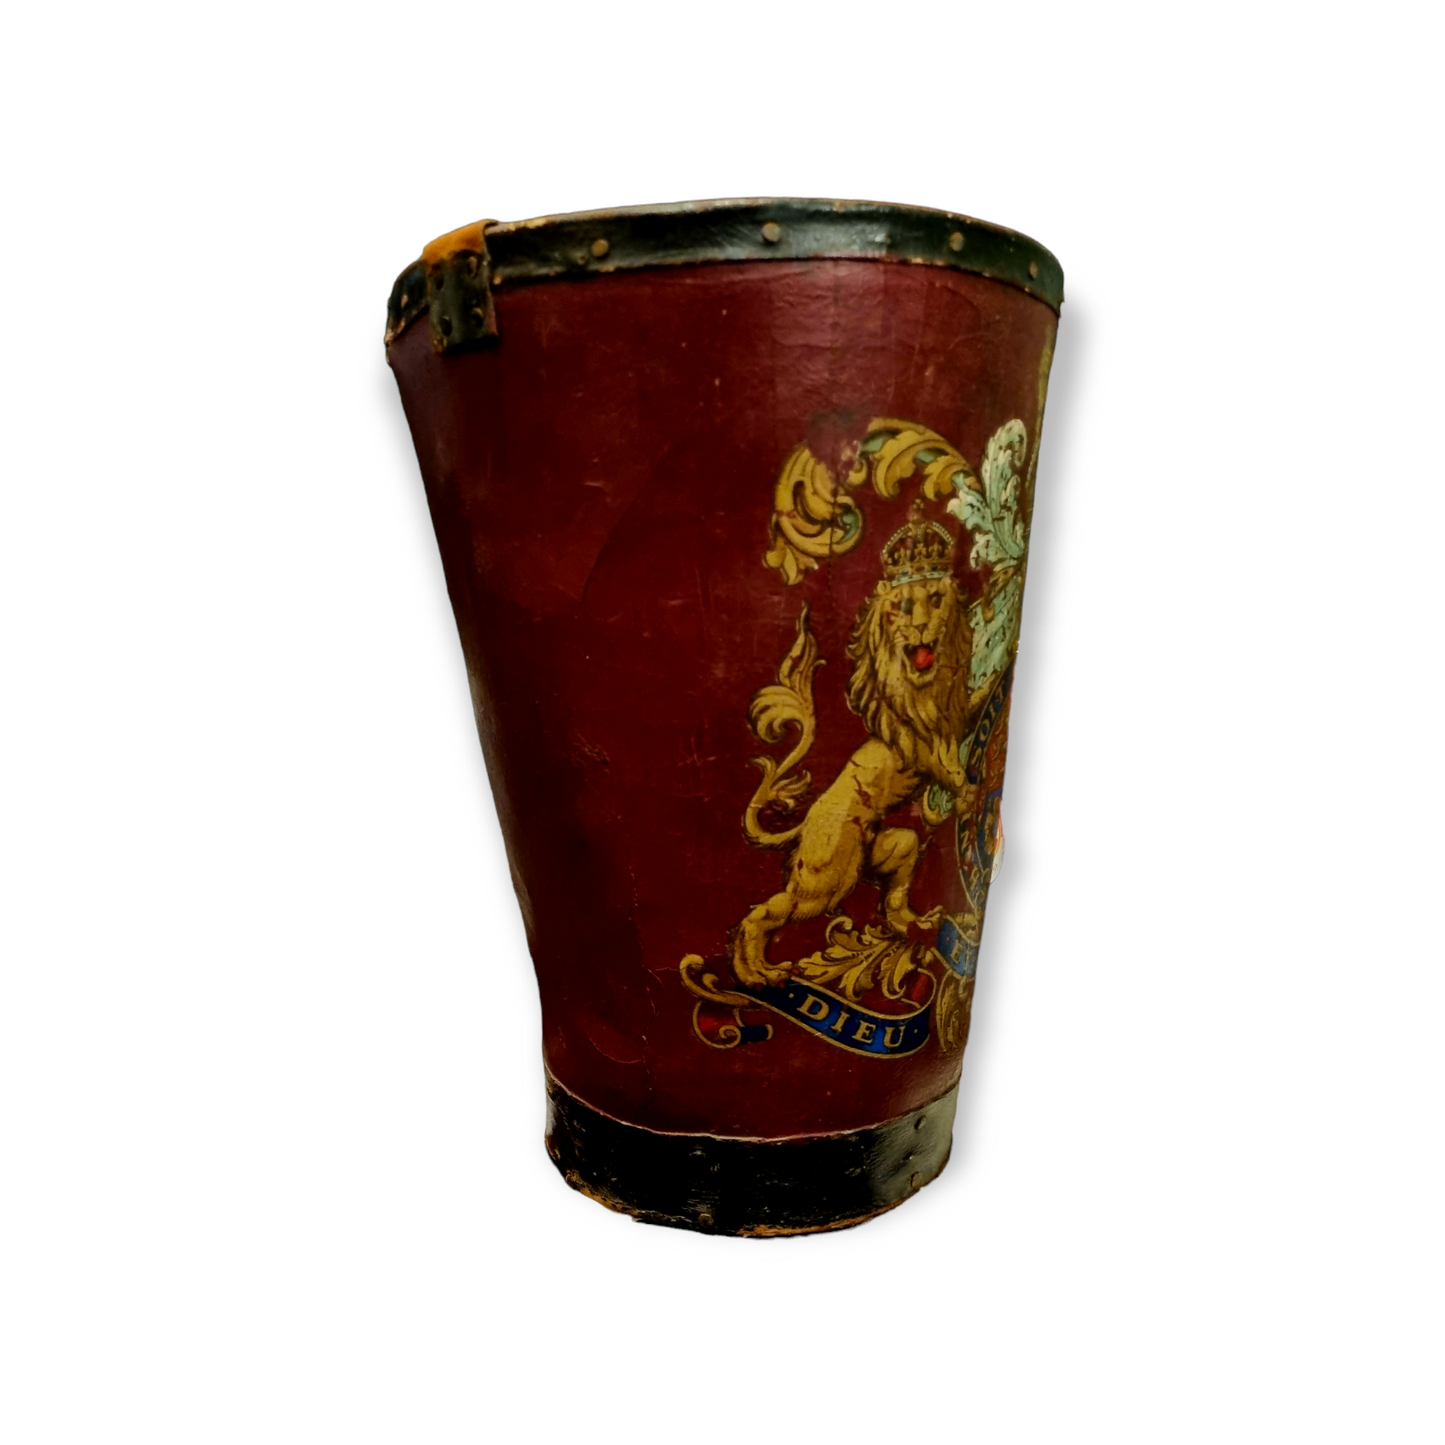 19th Century English Antique Leather Fire Bucket With Royal Coat of Arms